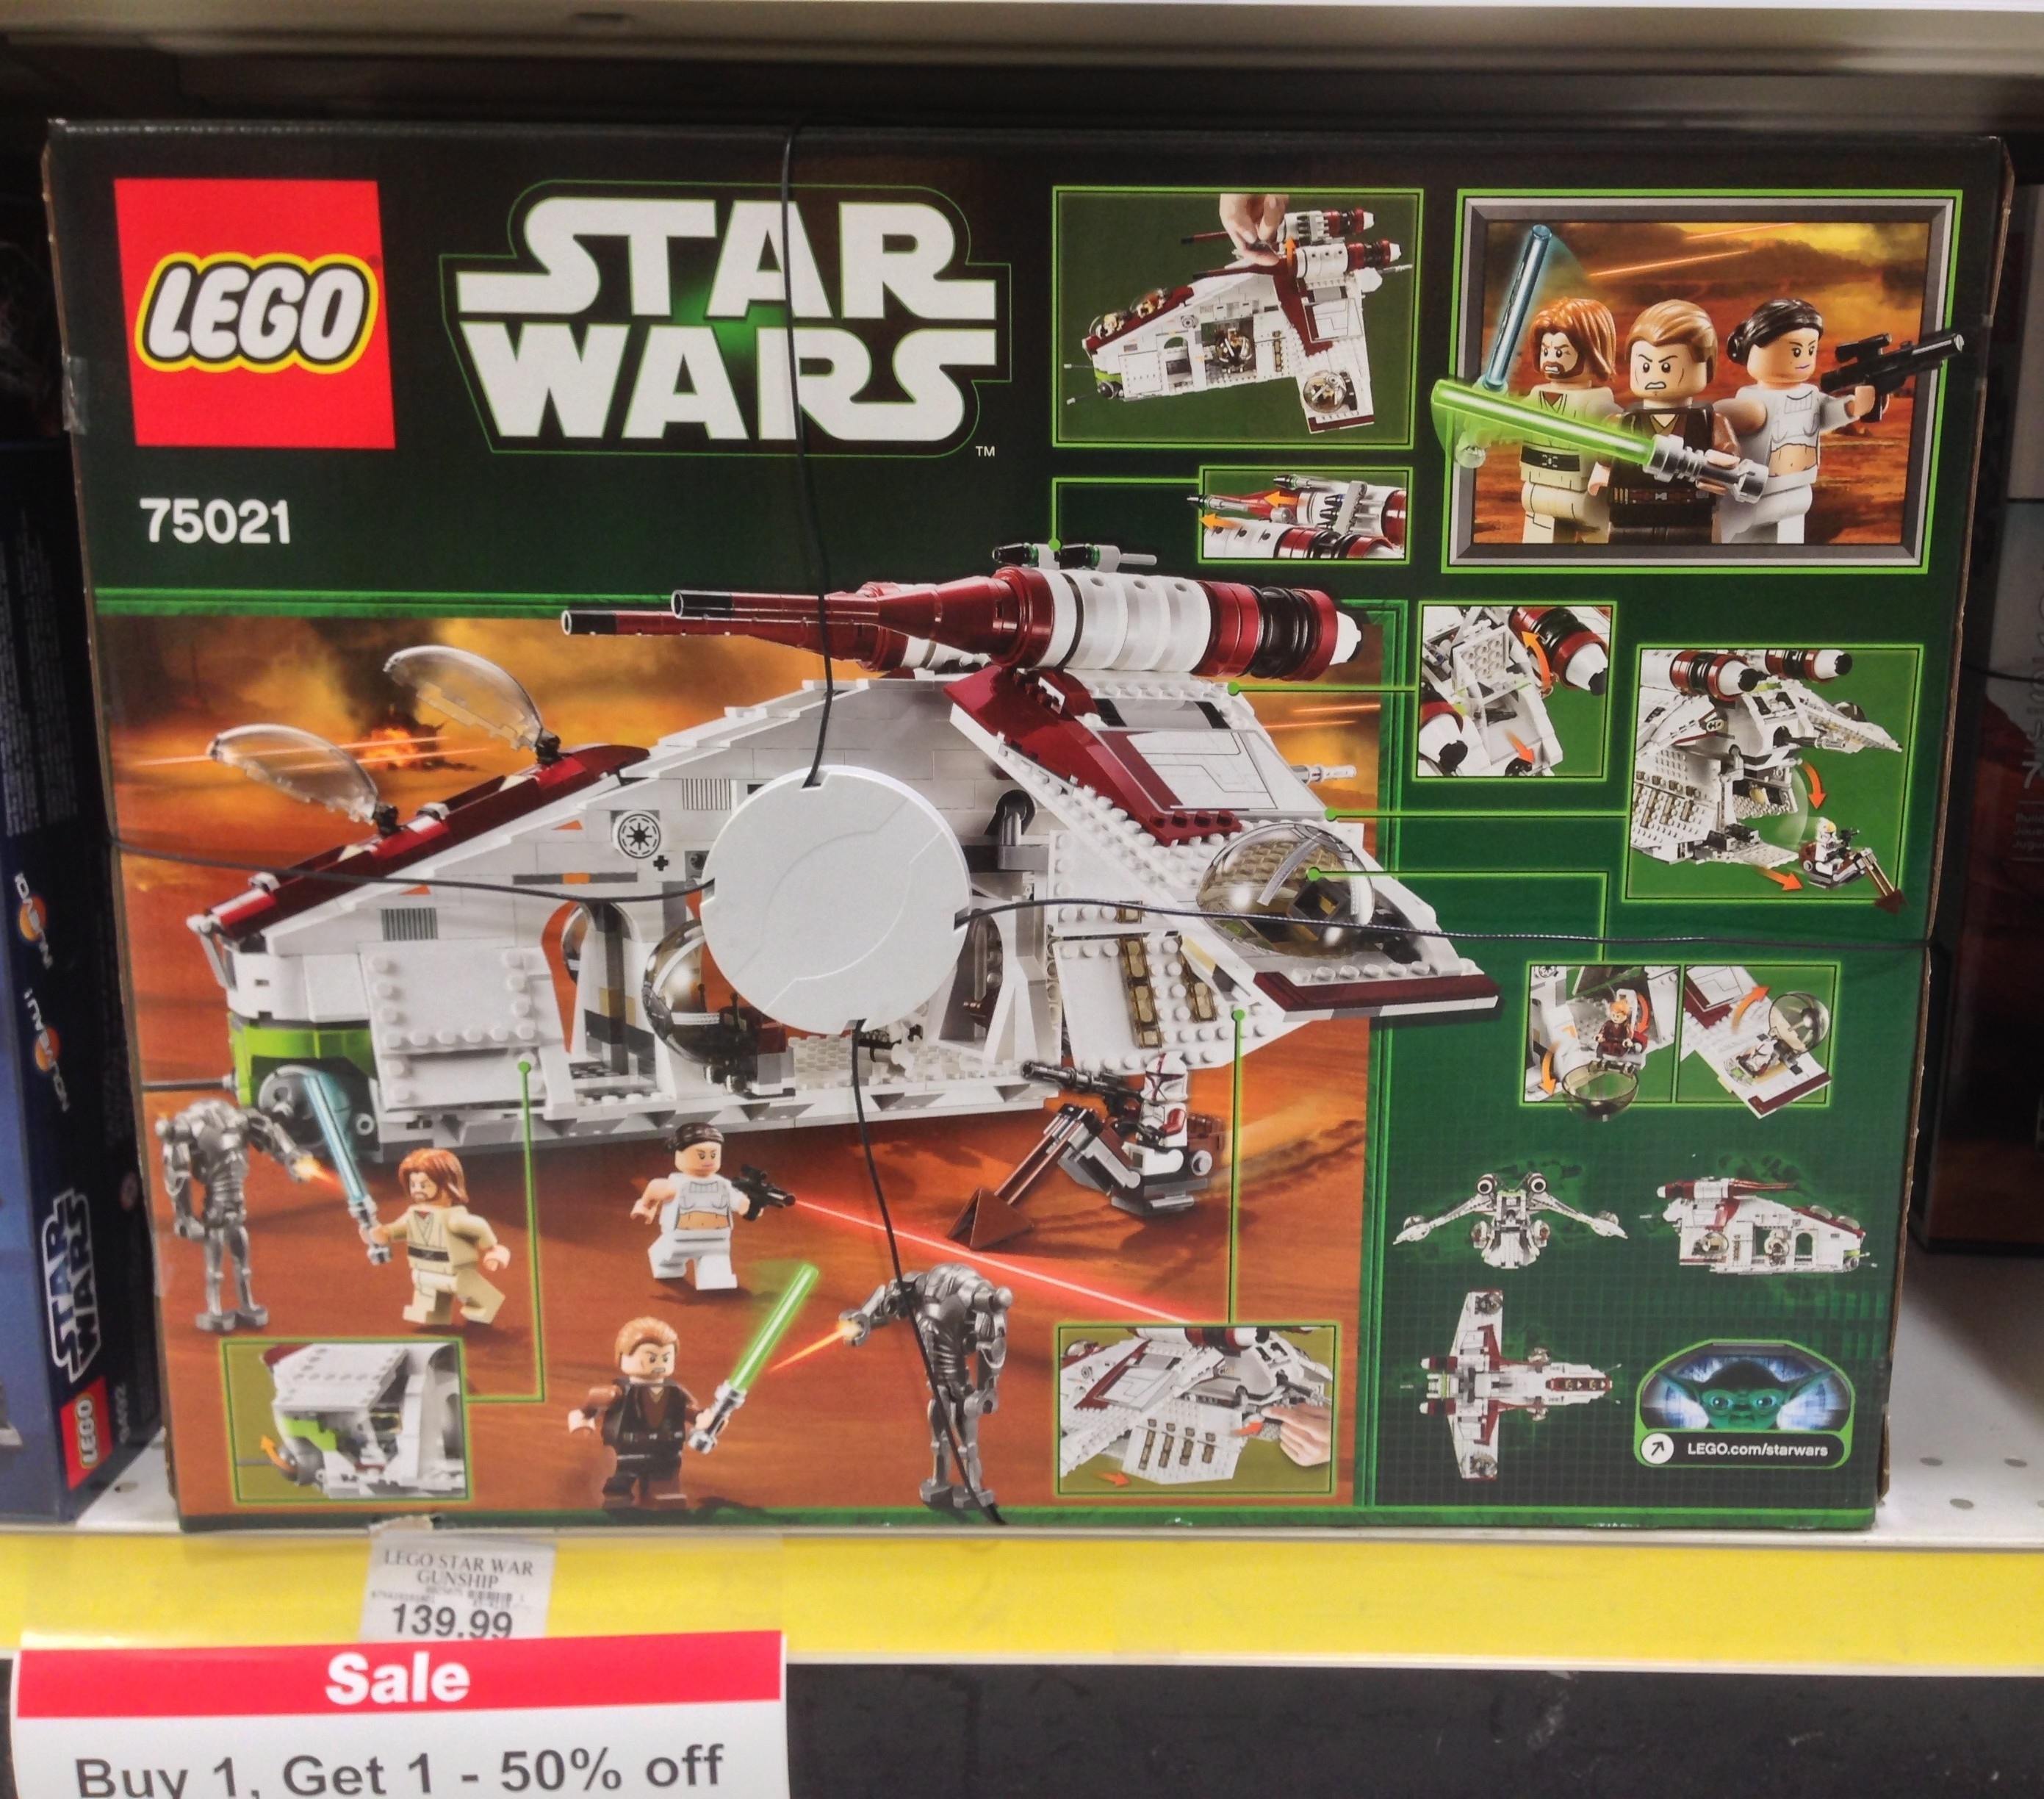 2013 Lego Star Wars Summer/fall Sets Released In The United States  Star Wars Lego Sets Code